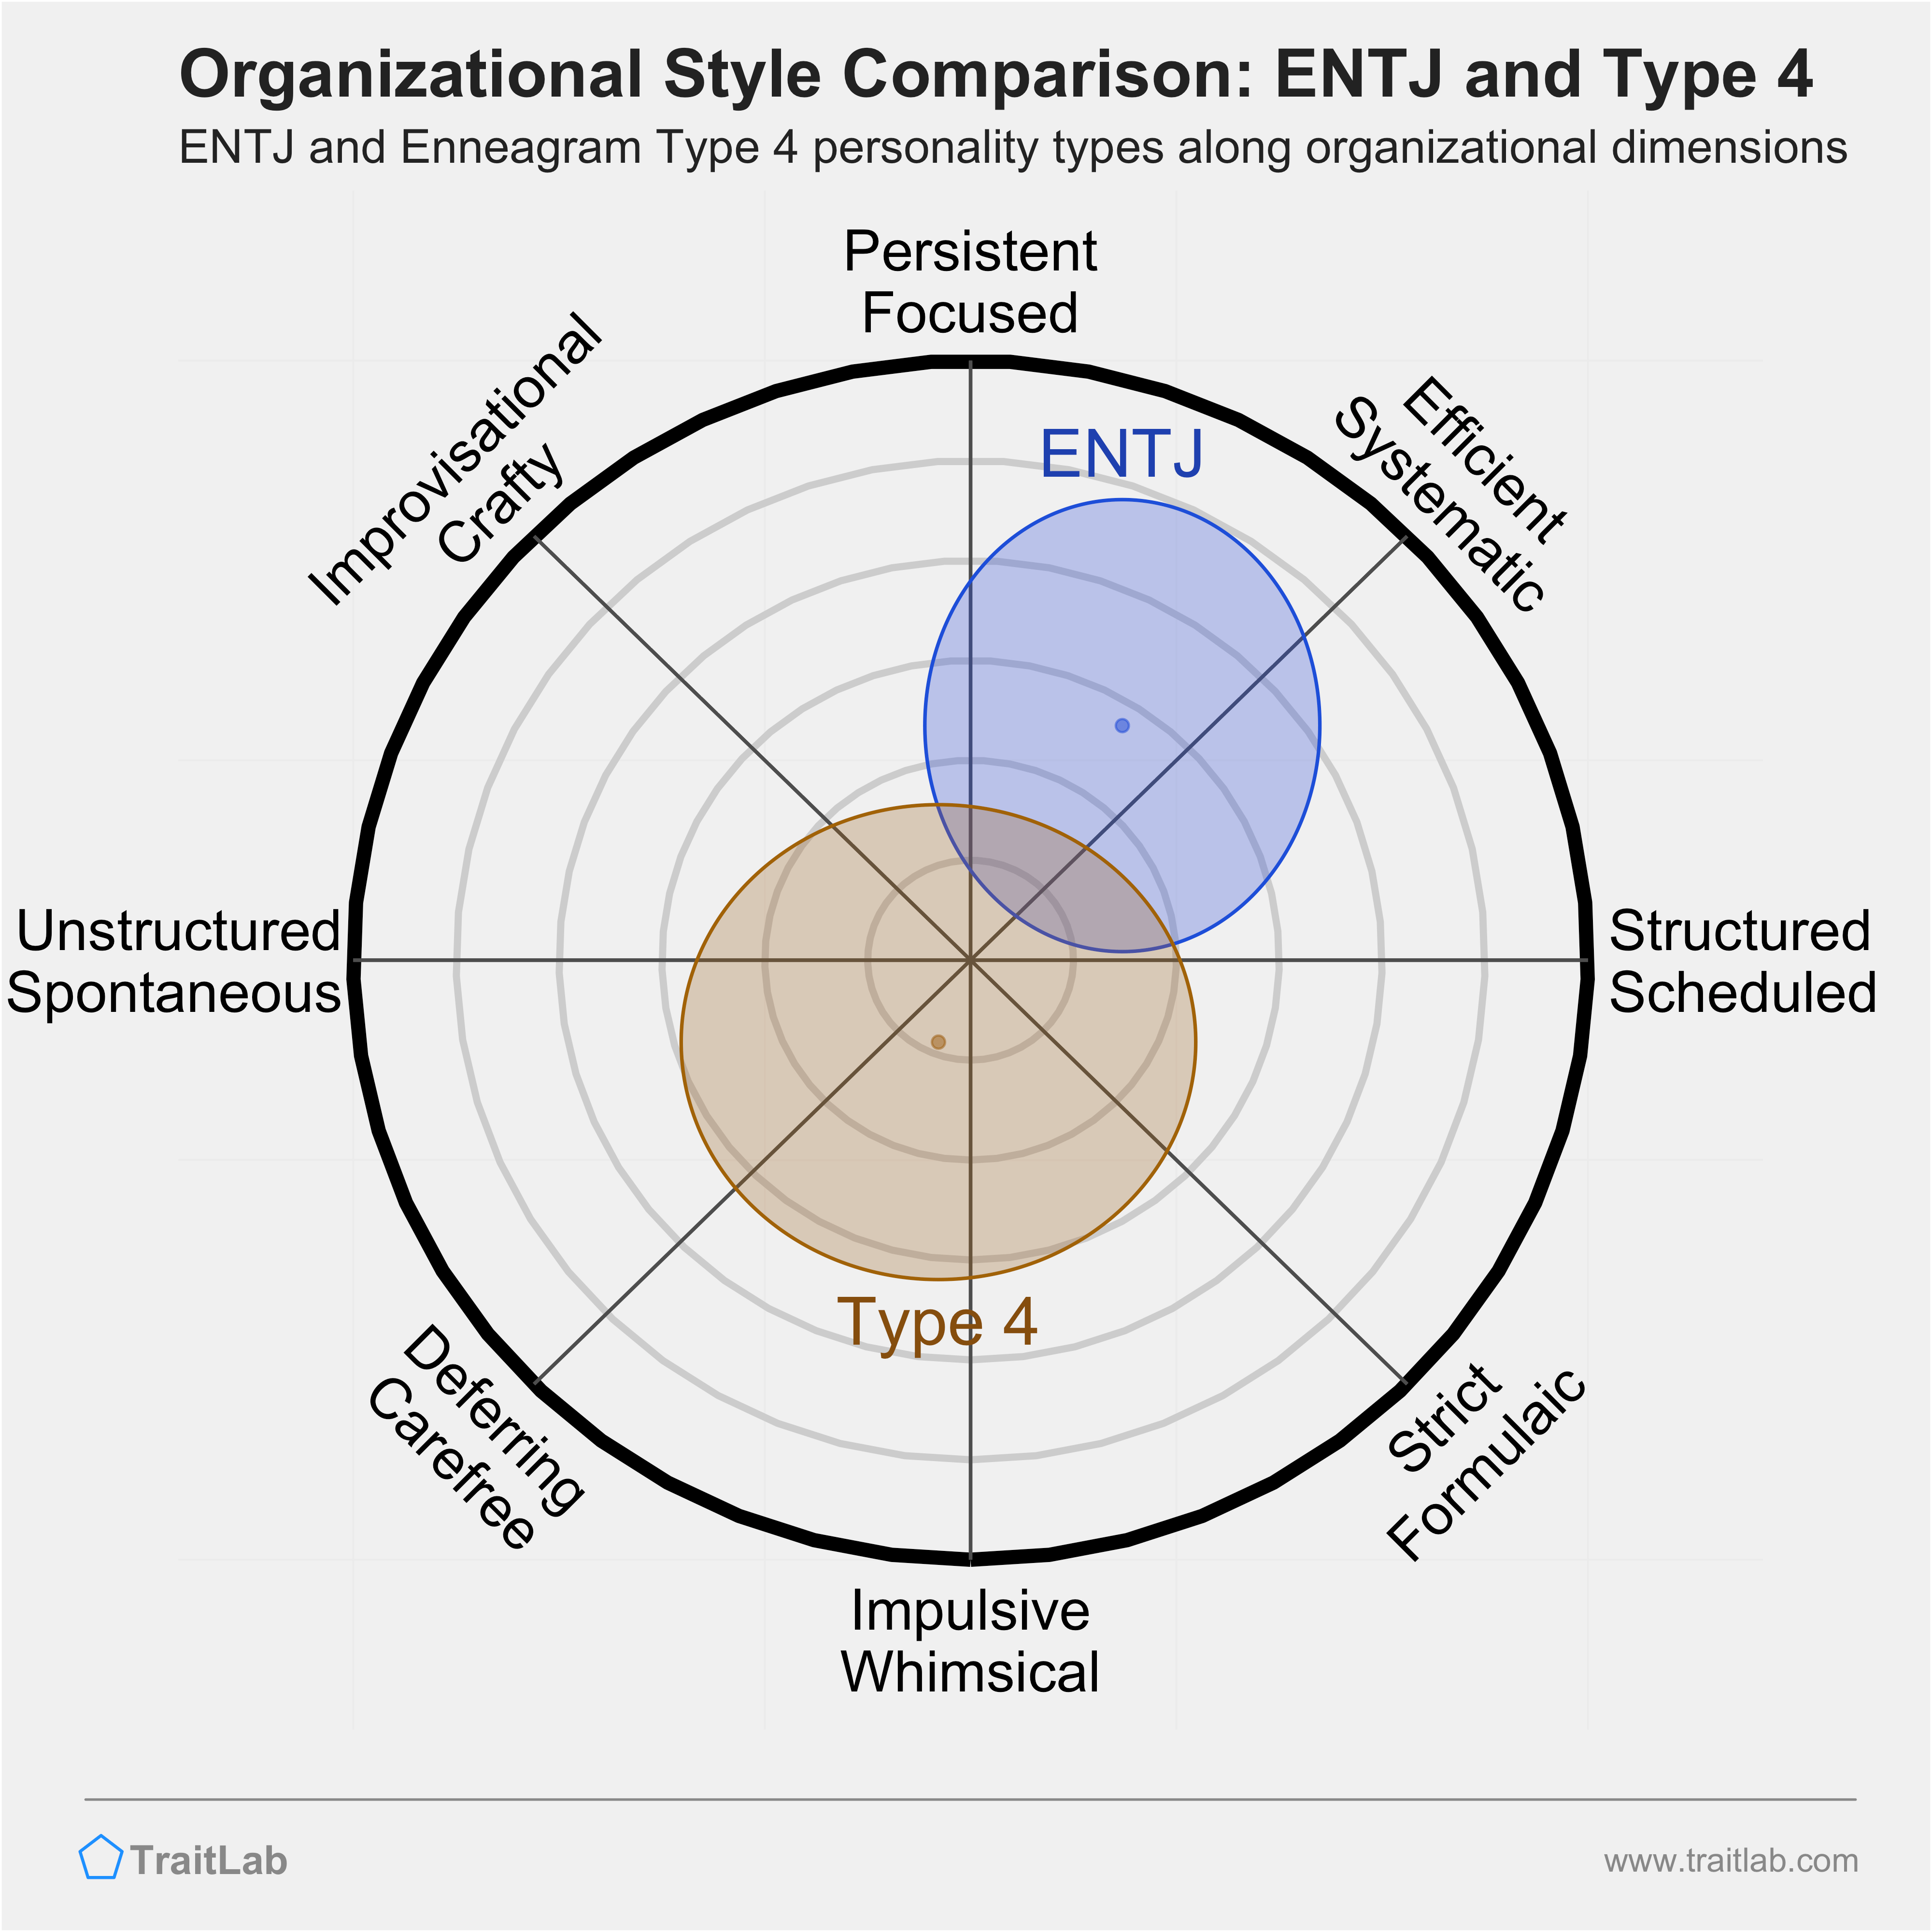 ENTJ and Type 4 comparison across organizational dimensions